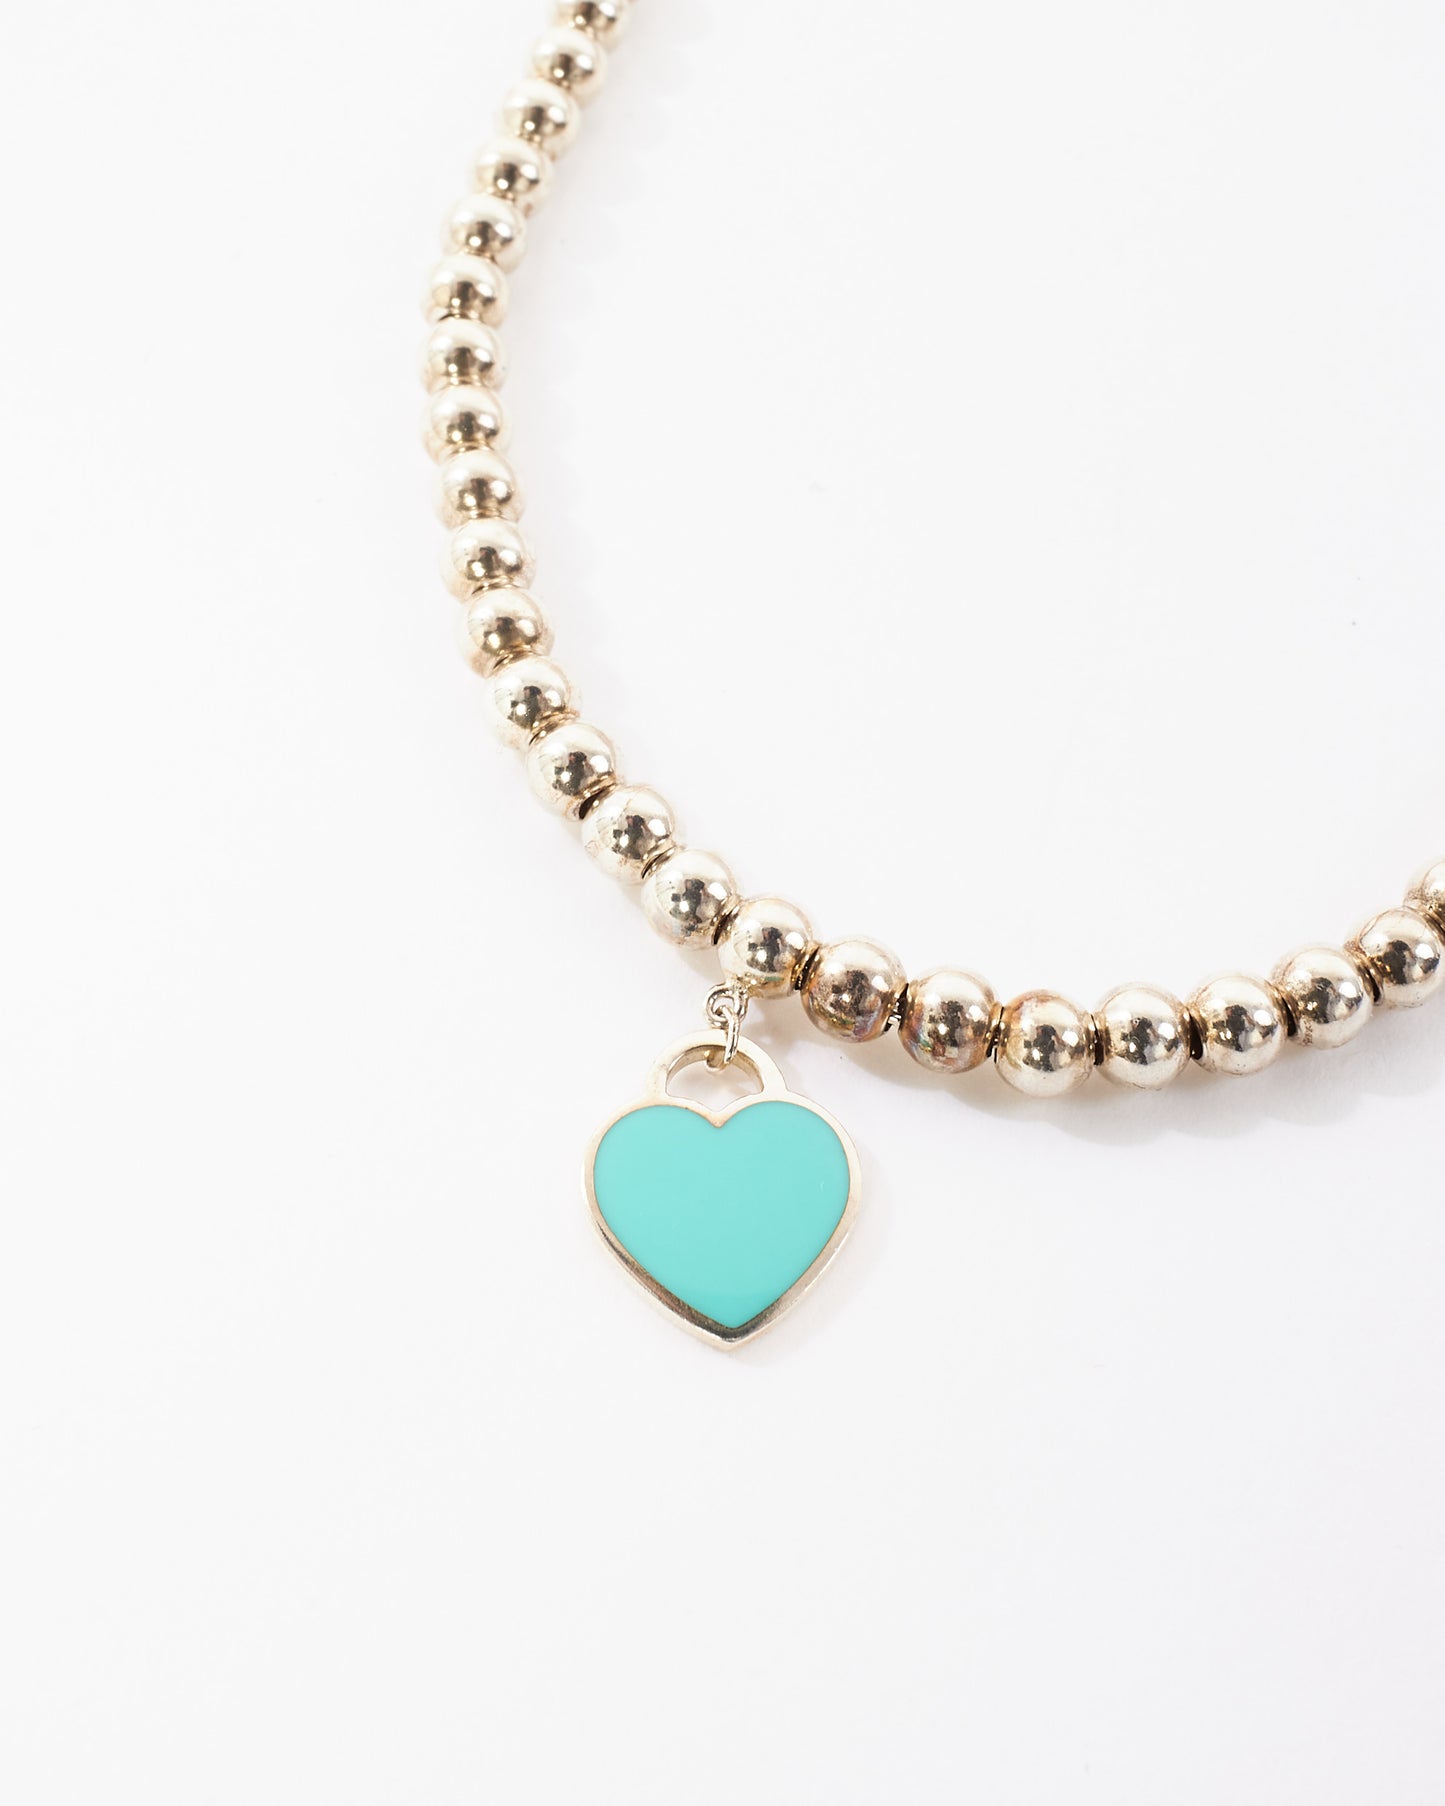 Tiffany & Co. Silver Bead Turquoise Heart Tag Necklace